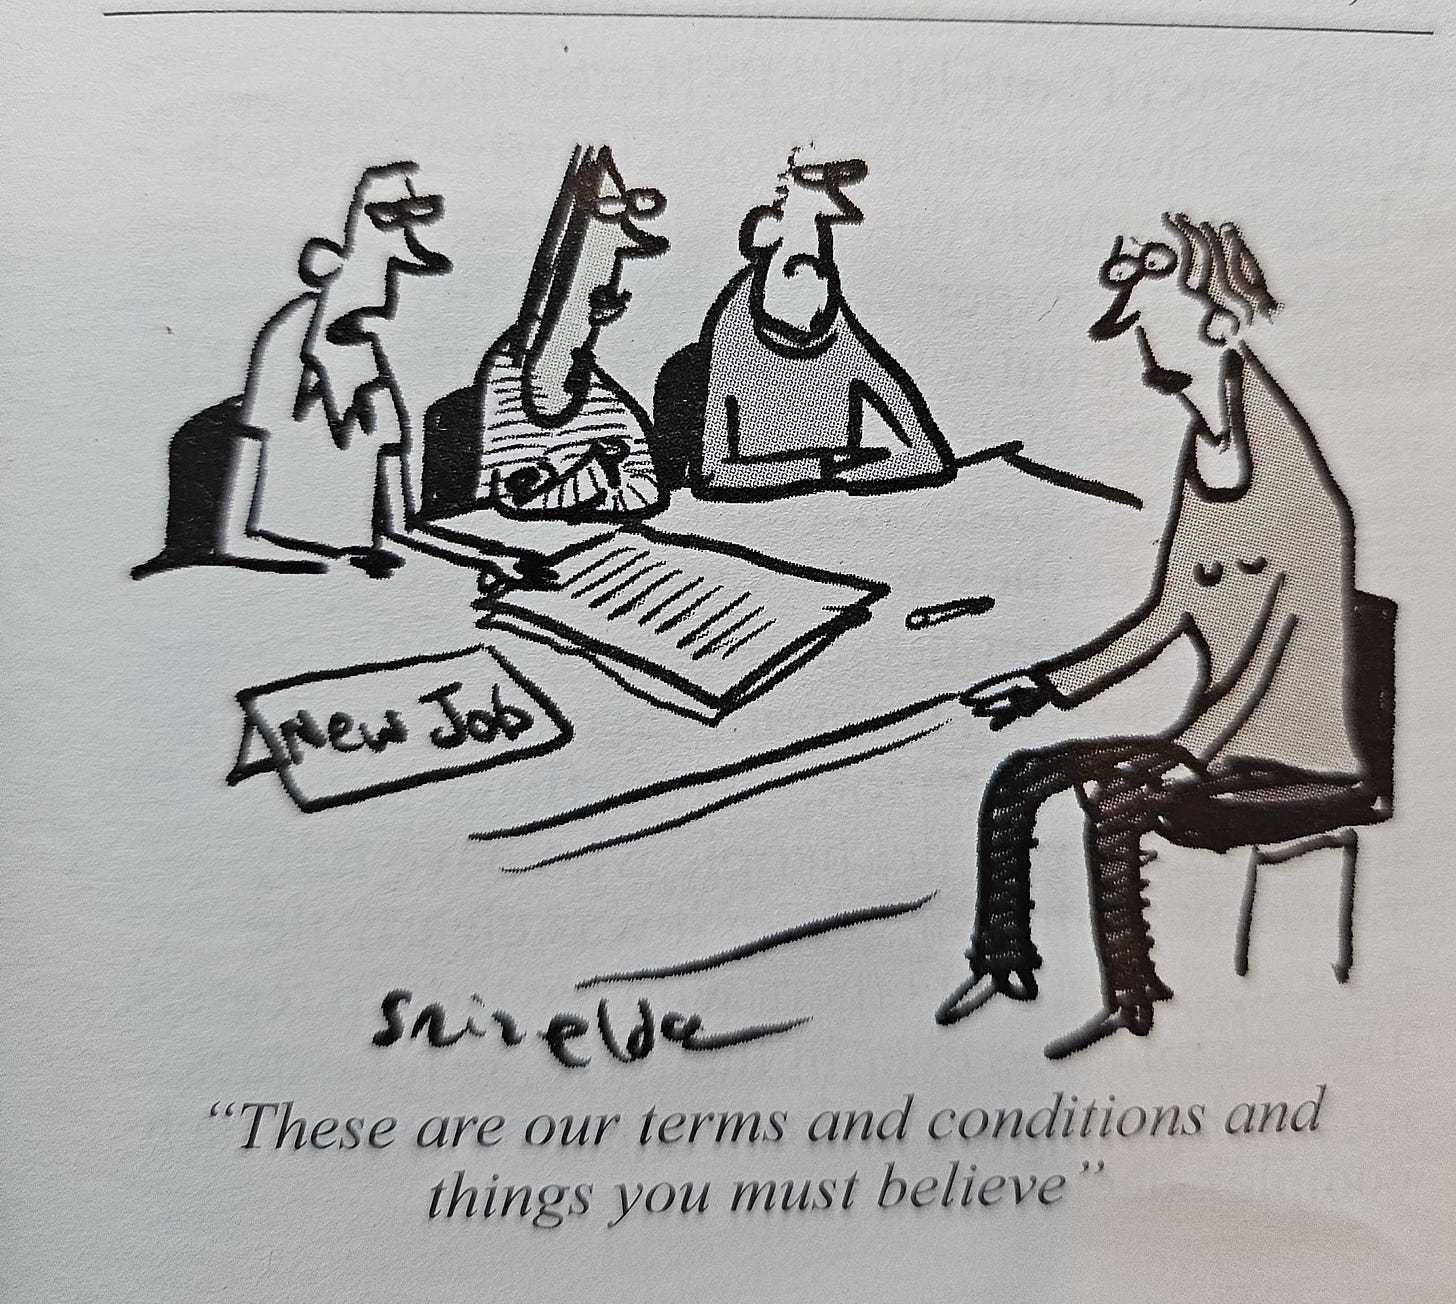 Grizelda cartoon from Private Eye as detailed in text above image